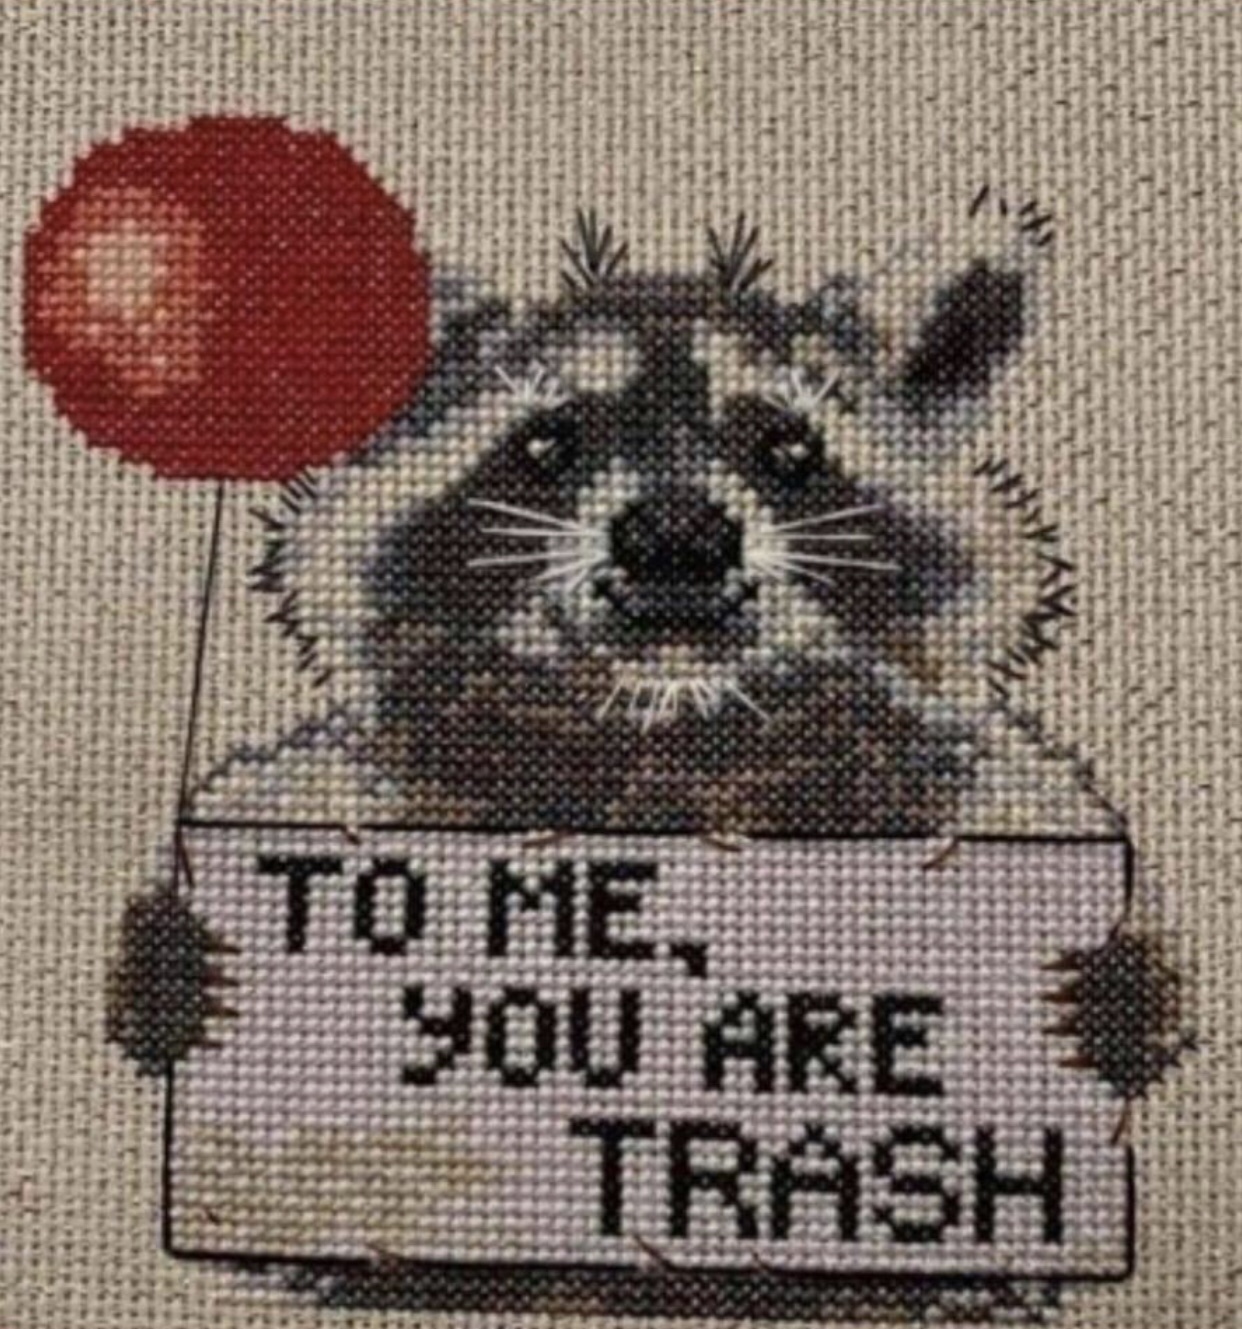 me you are trash raccoon cross stitch - You Are Trash